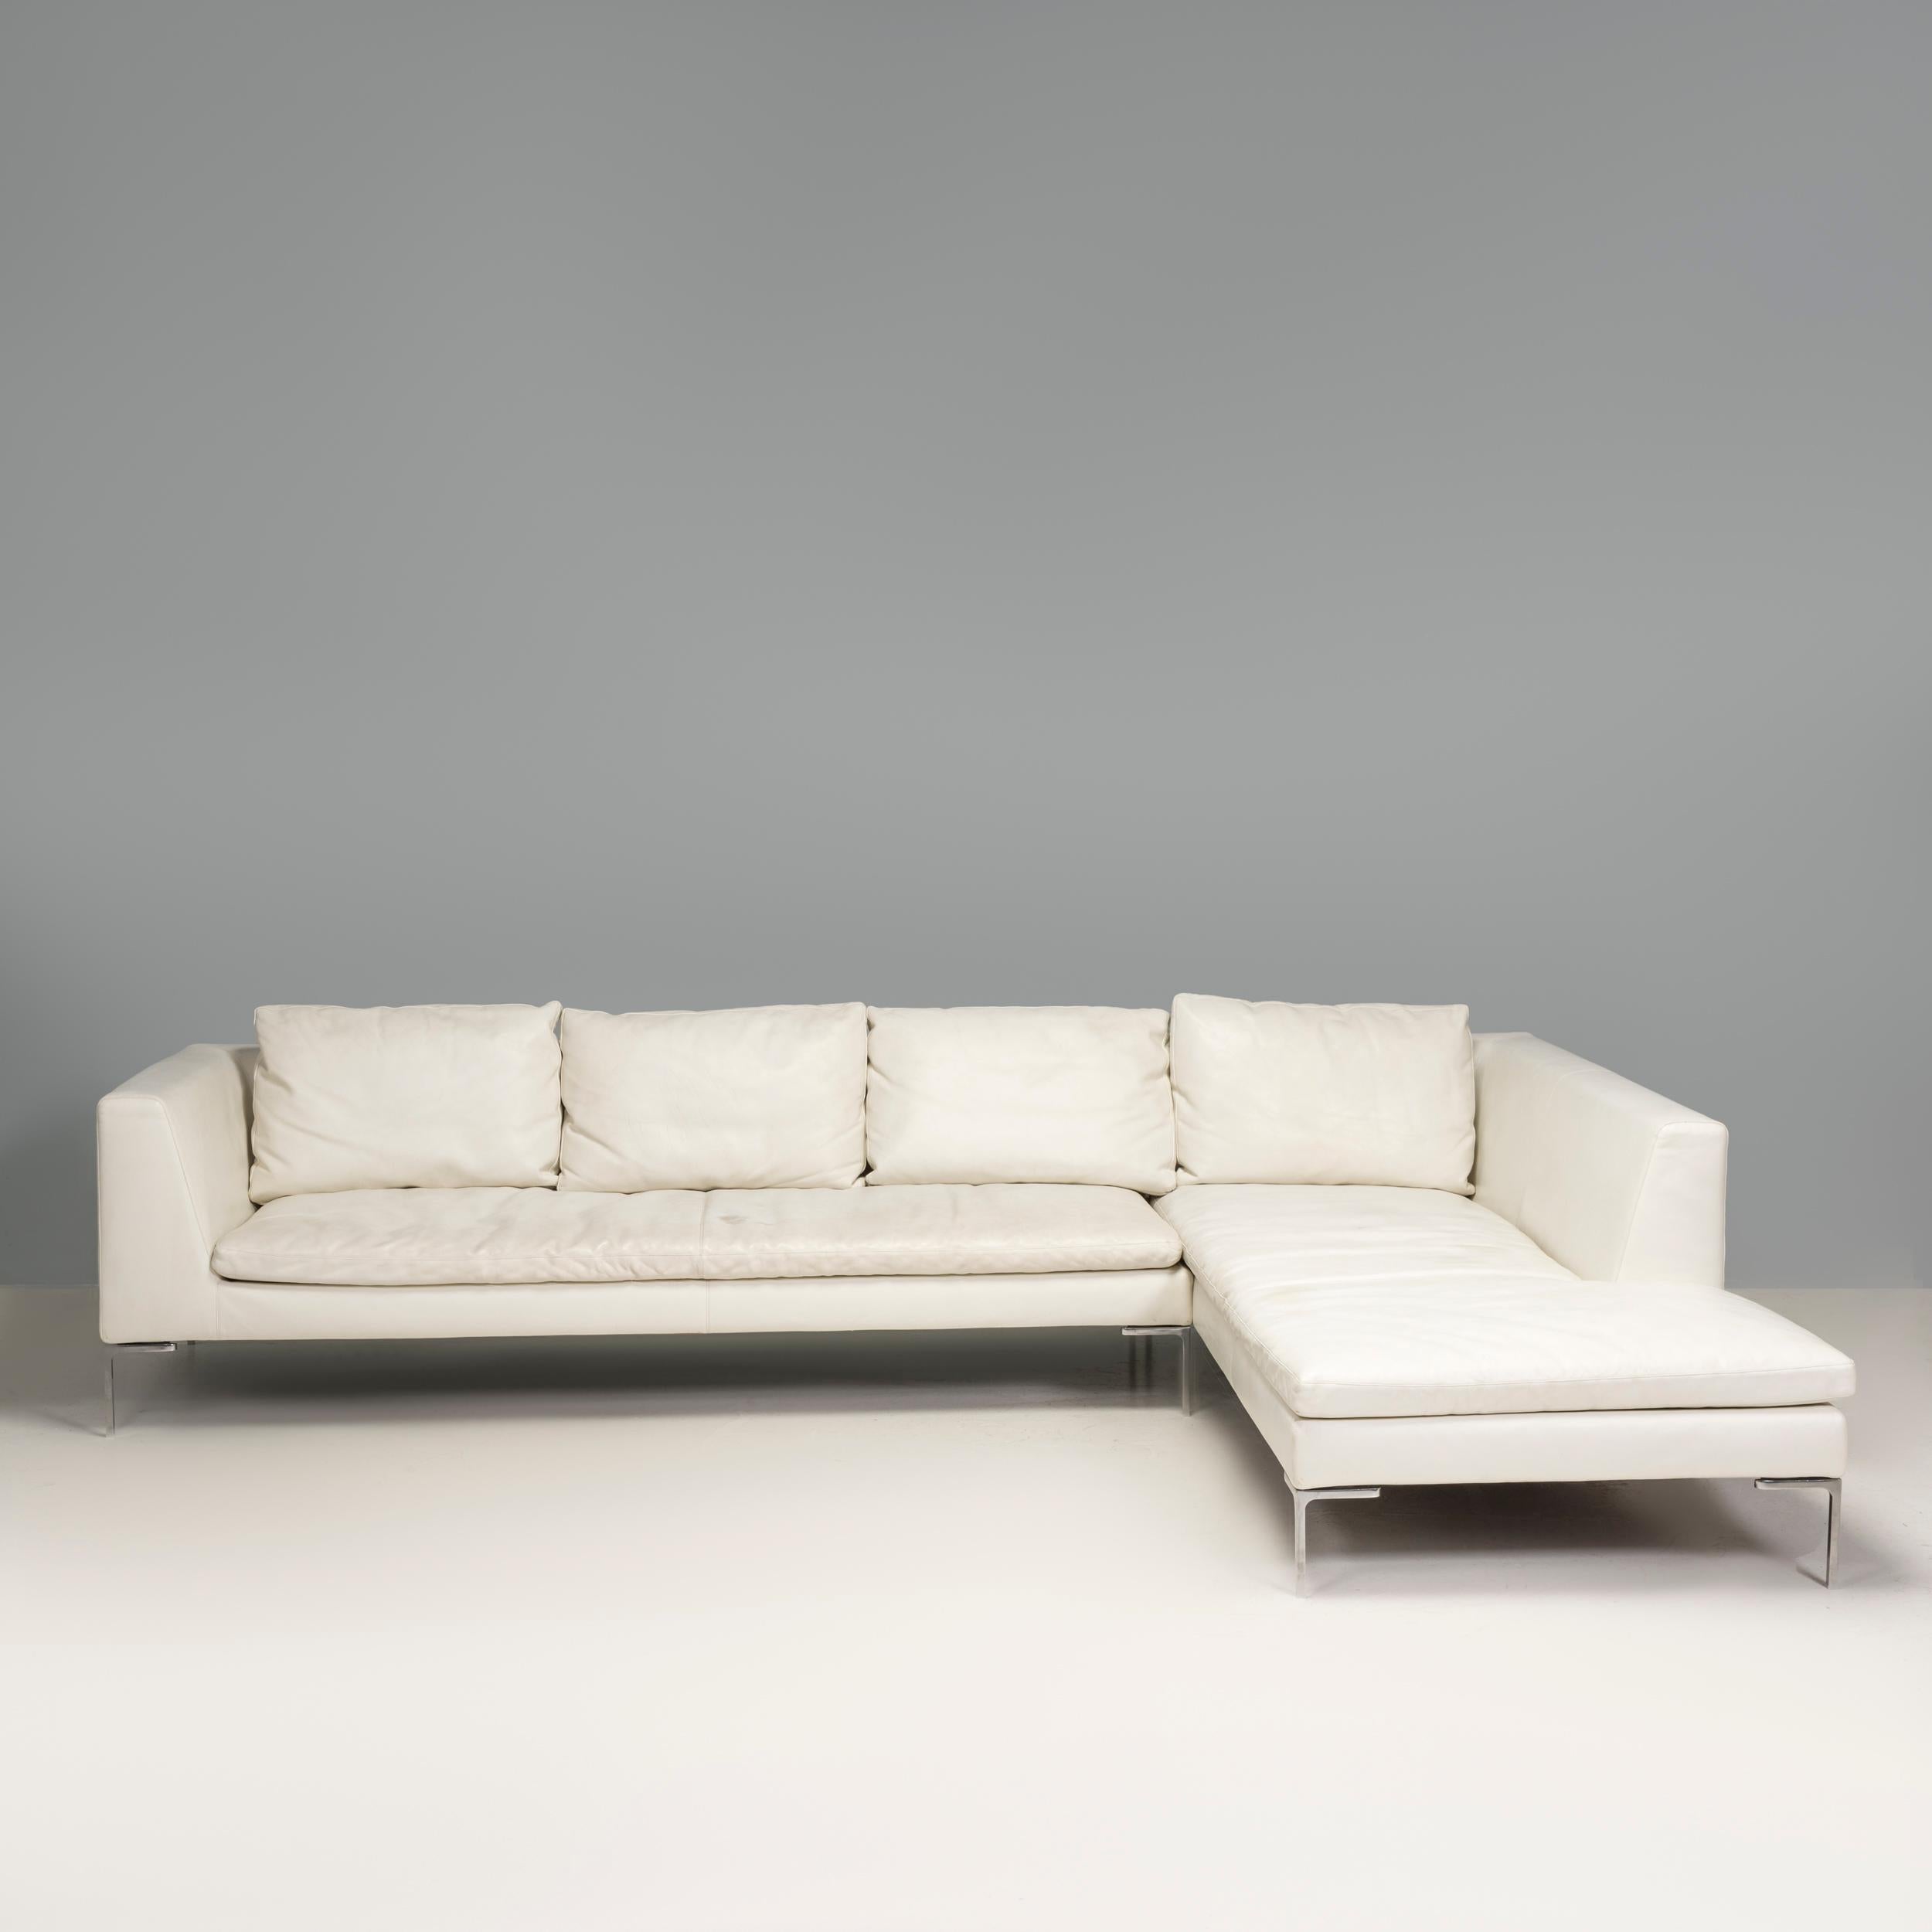 Originally designed by Antonio Citterio in 1997, the Charles sofa collection is manufactured by B&B Italia and is a fantastic example of contemporary Italian design.

Inspired by and named in tribute to the legendary designer Charles Eames, the